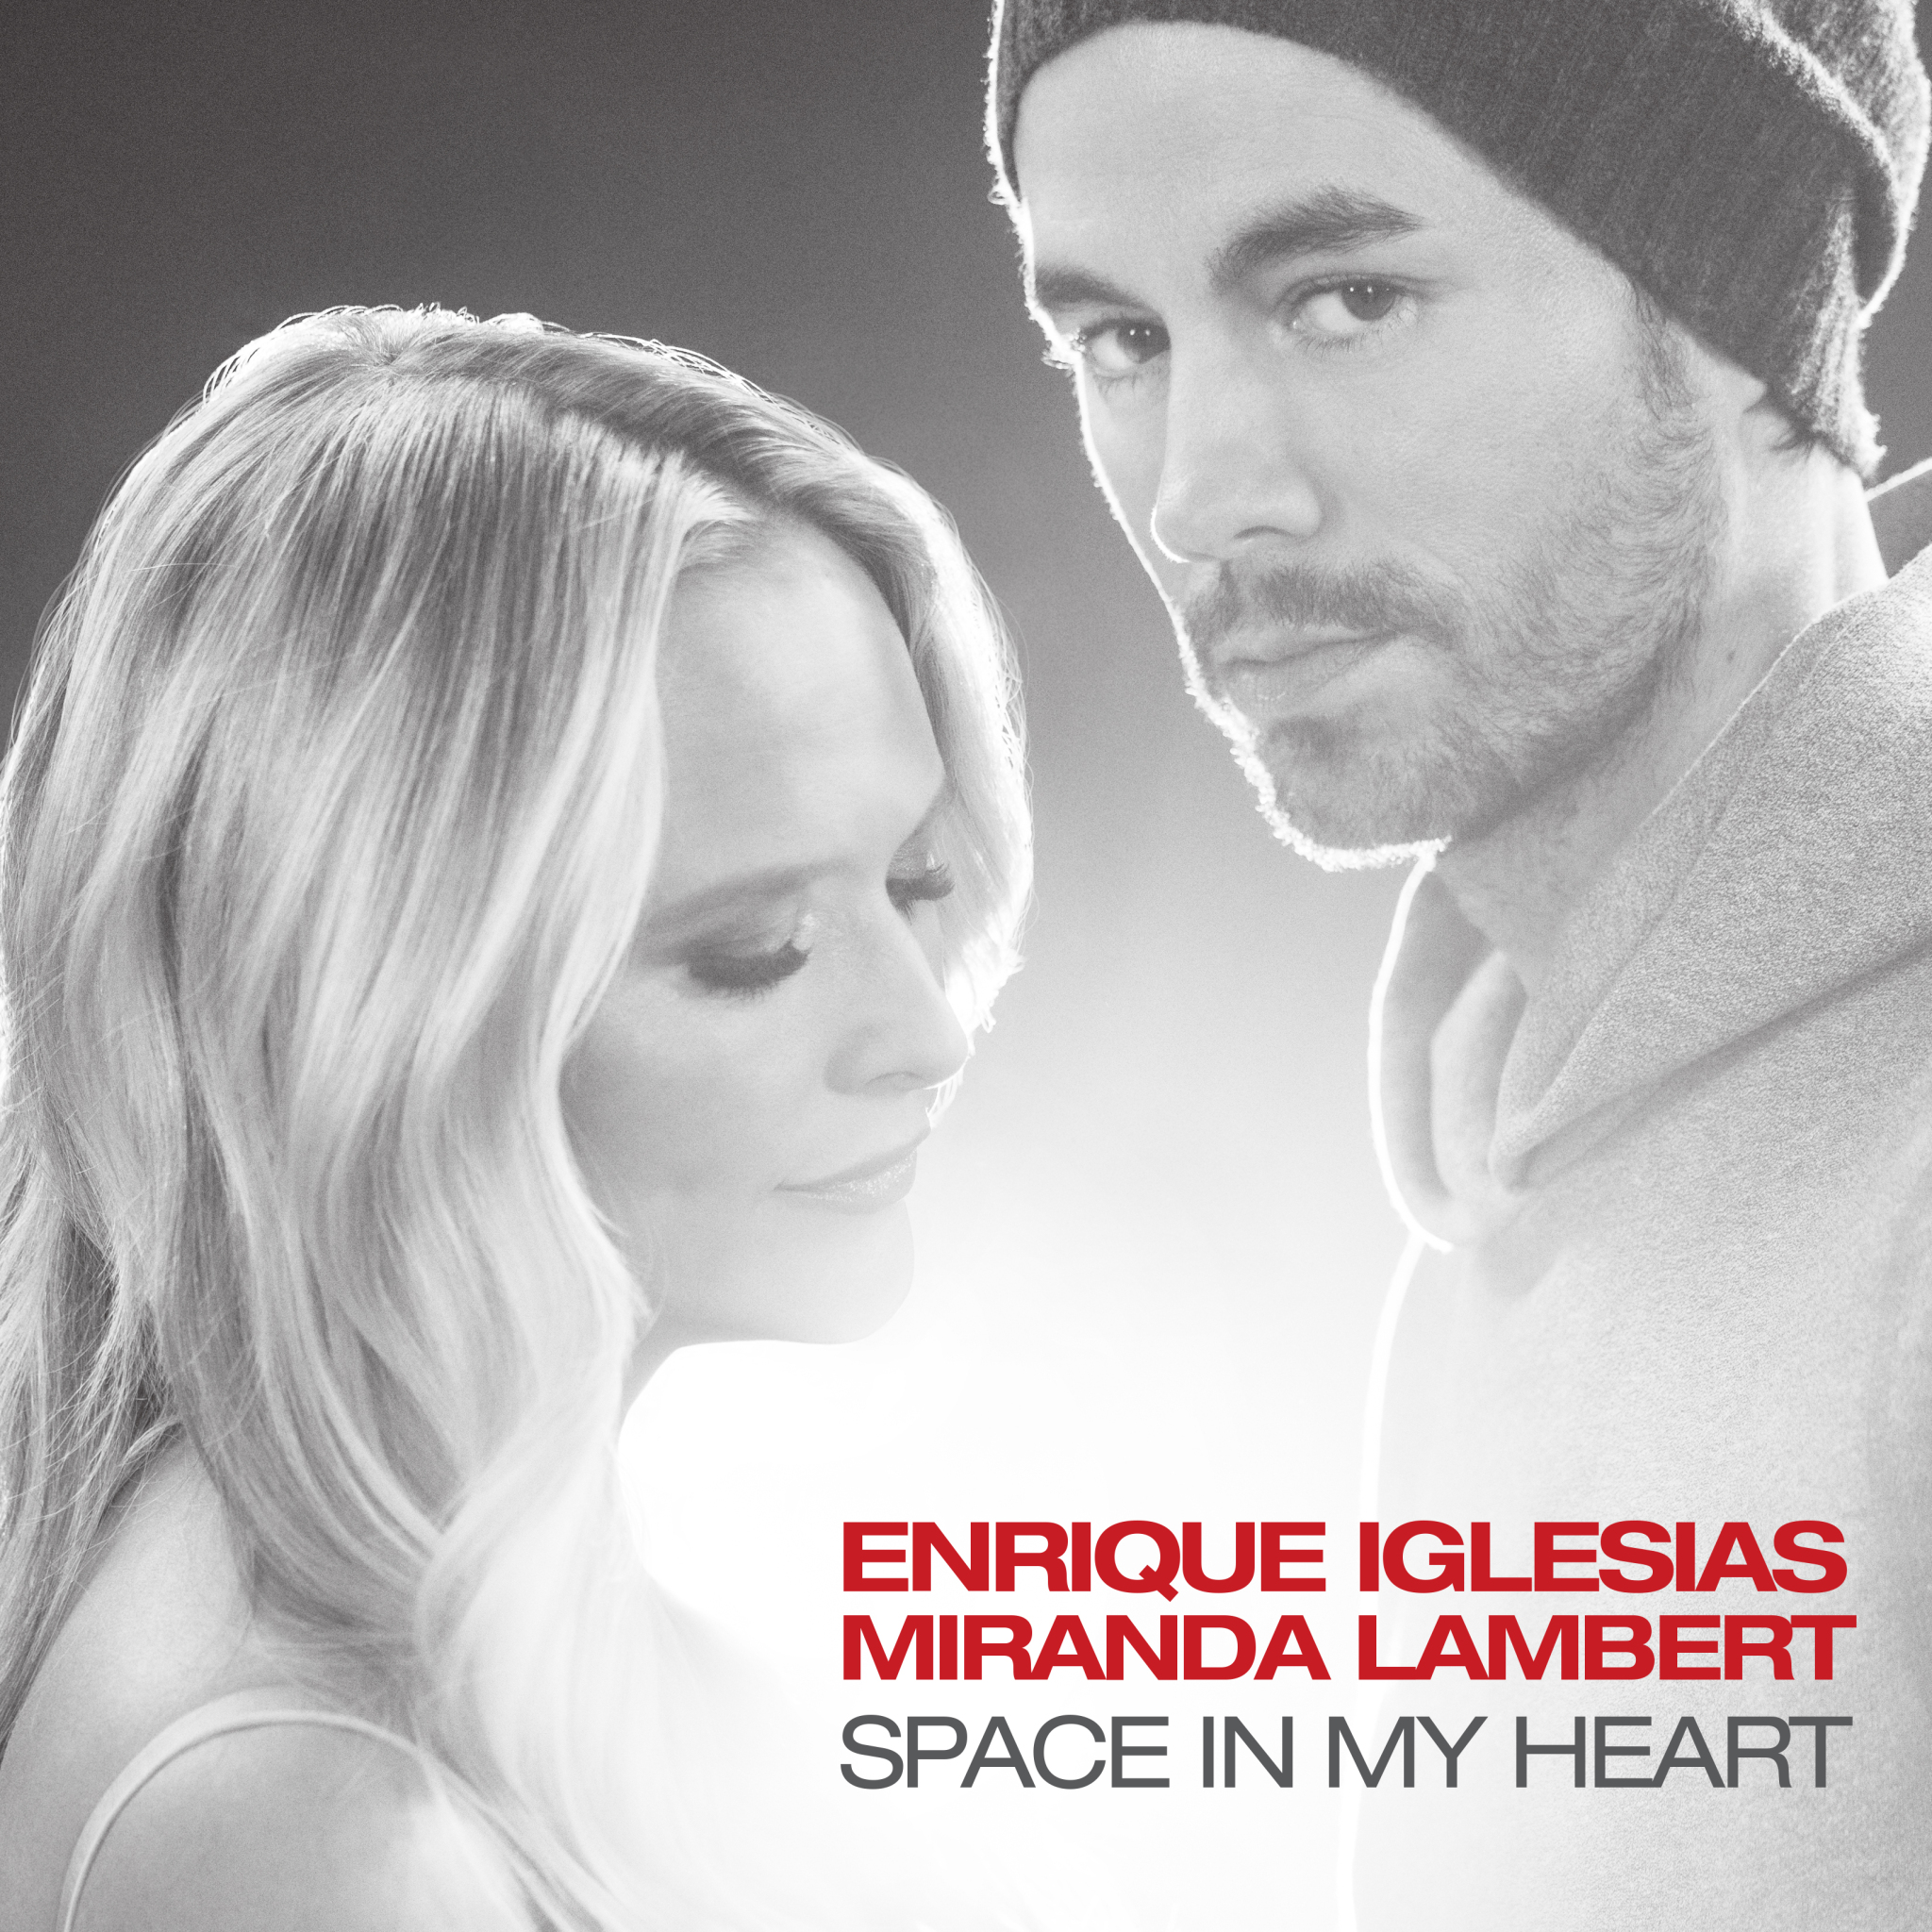 New Music Friday: Miranda Lambert and Enrique Iglesias Team Up For “Space in My Heart”